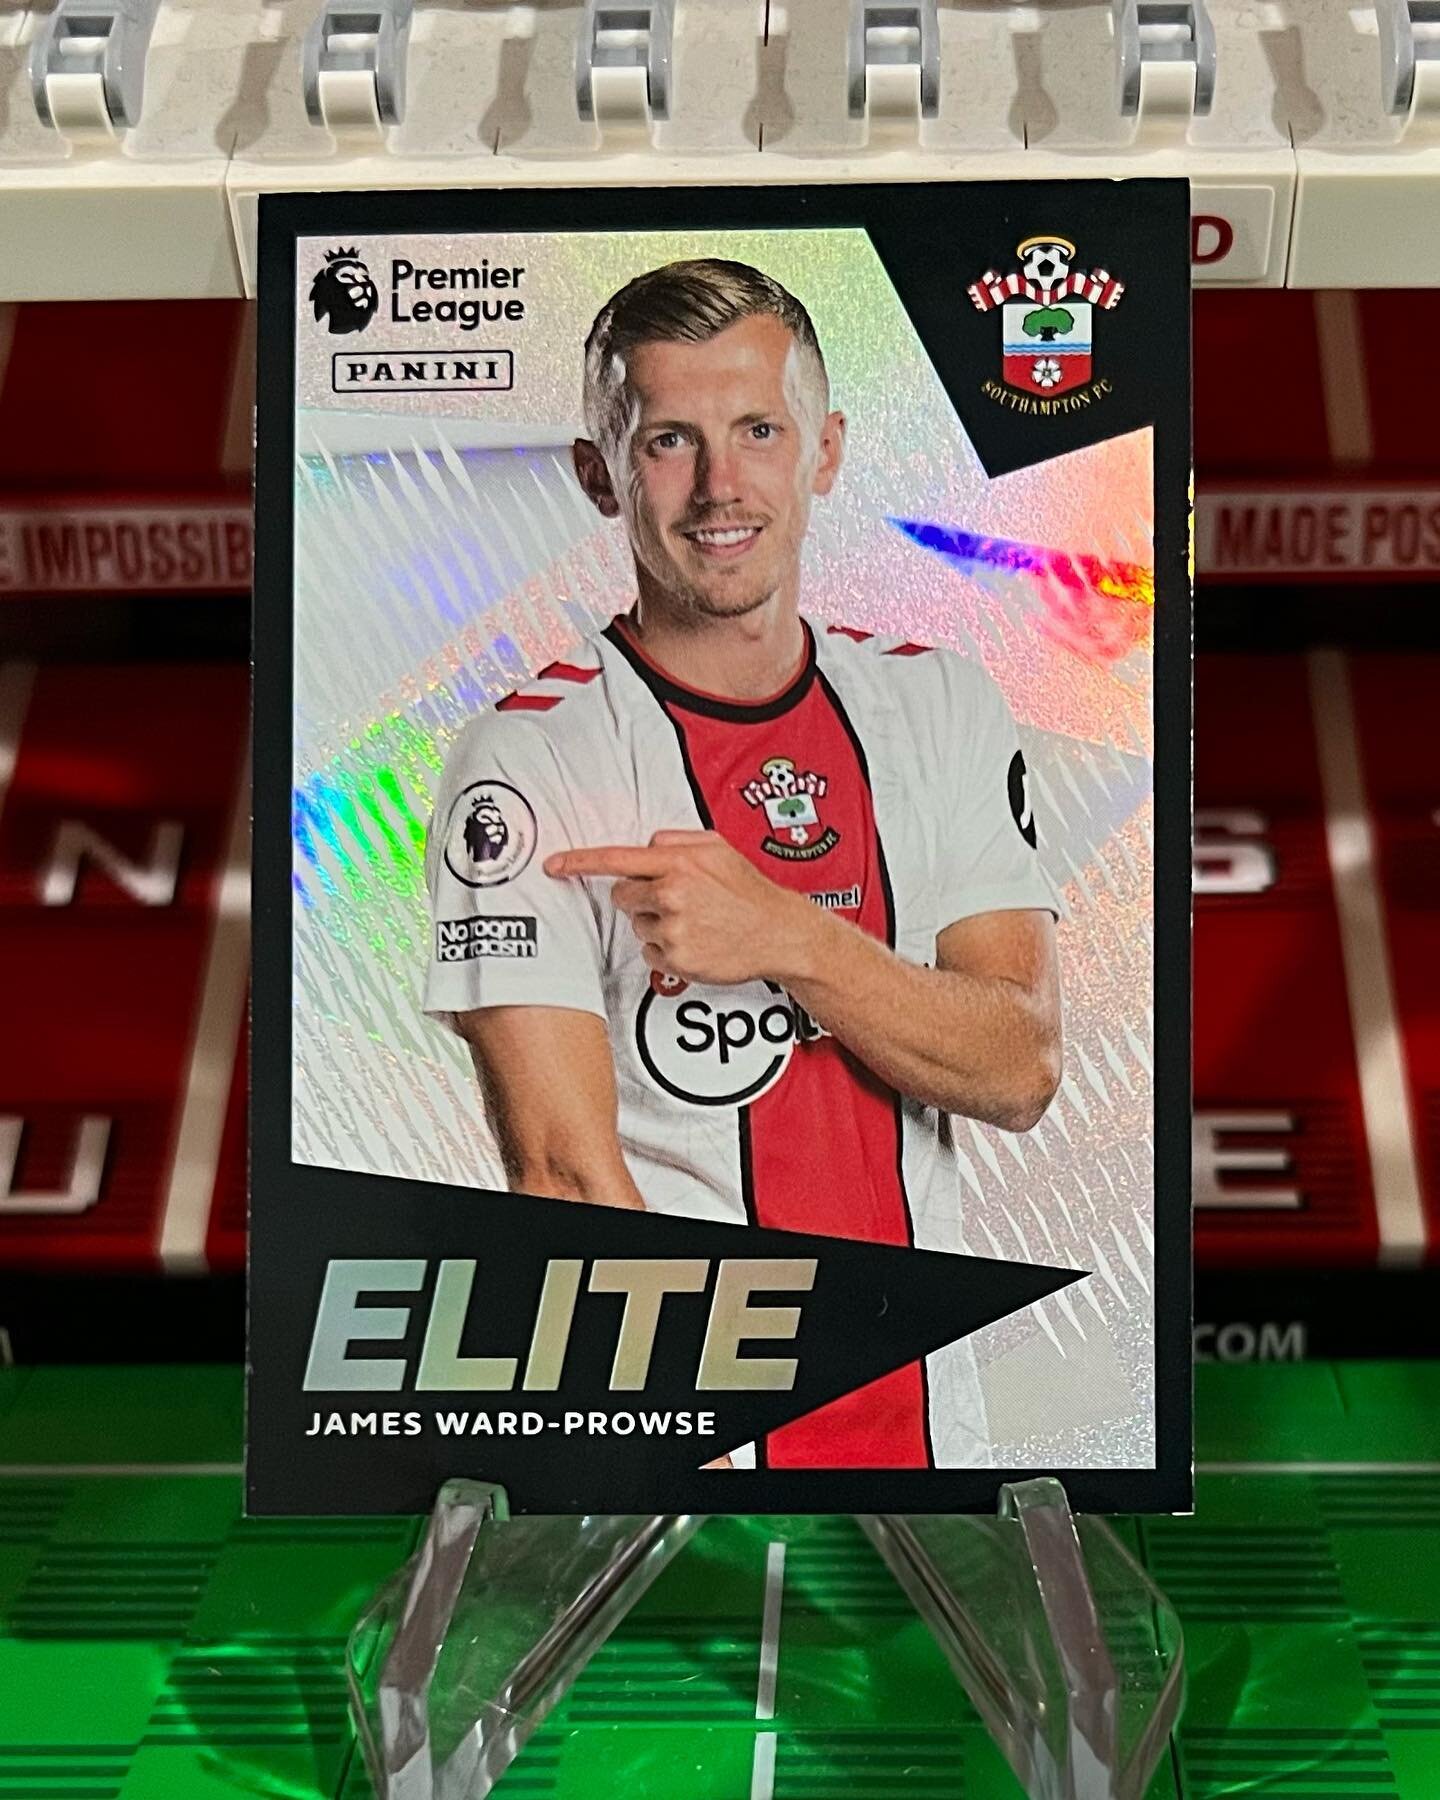 #southamptonfc #southamptoncards #paninisoccer #paninistickers #soccercards